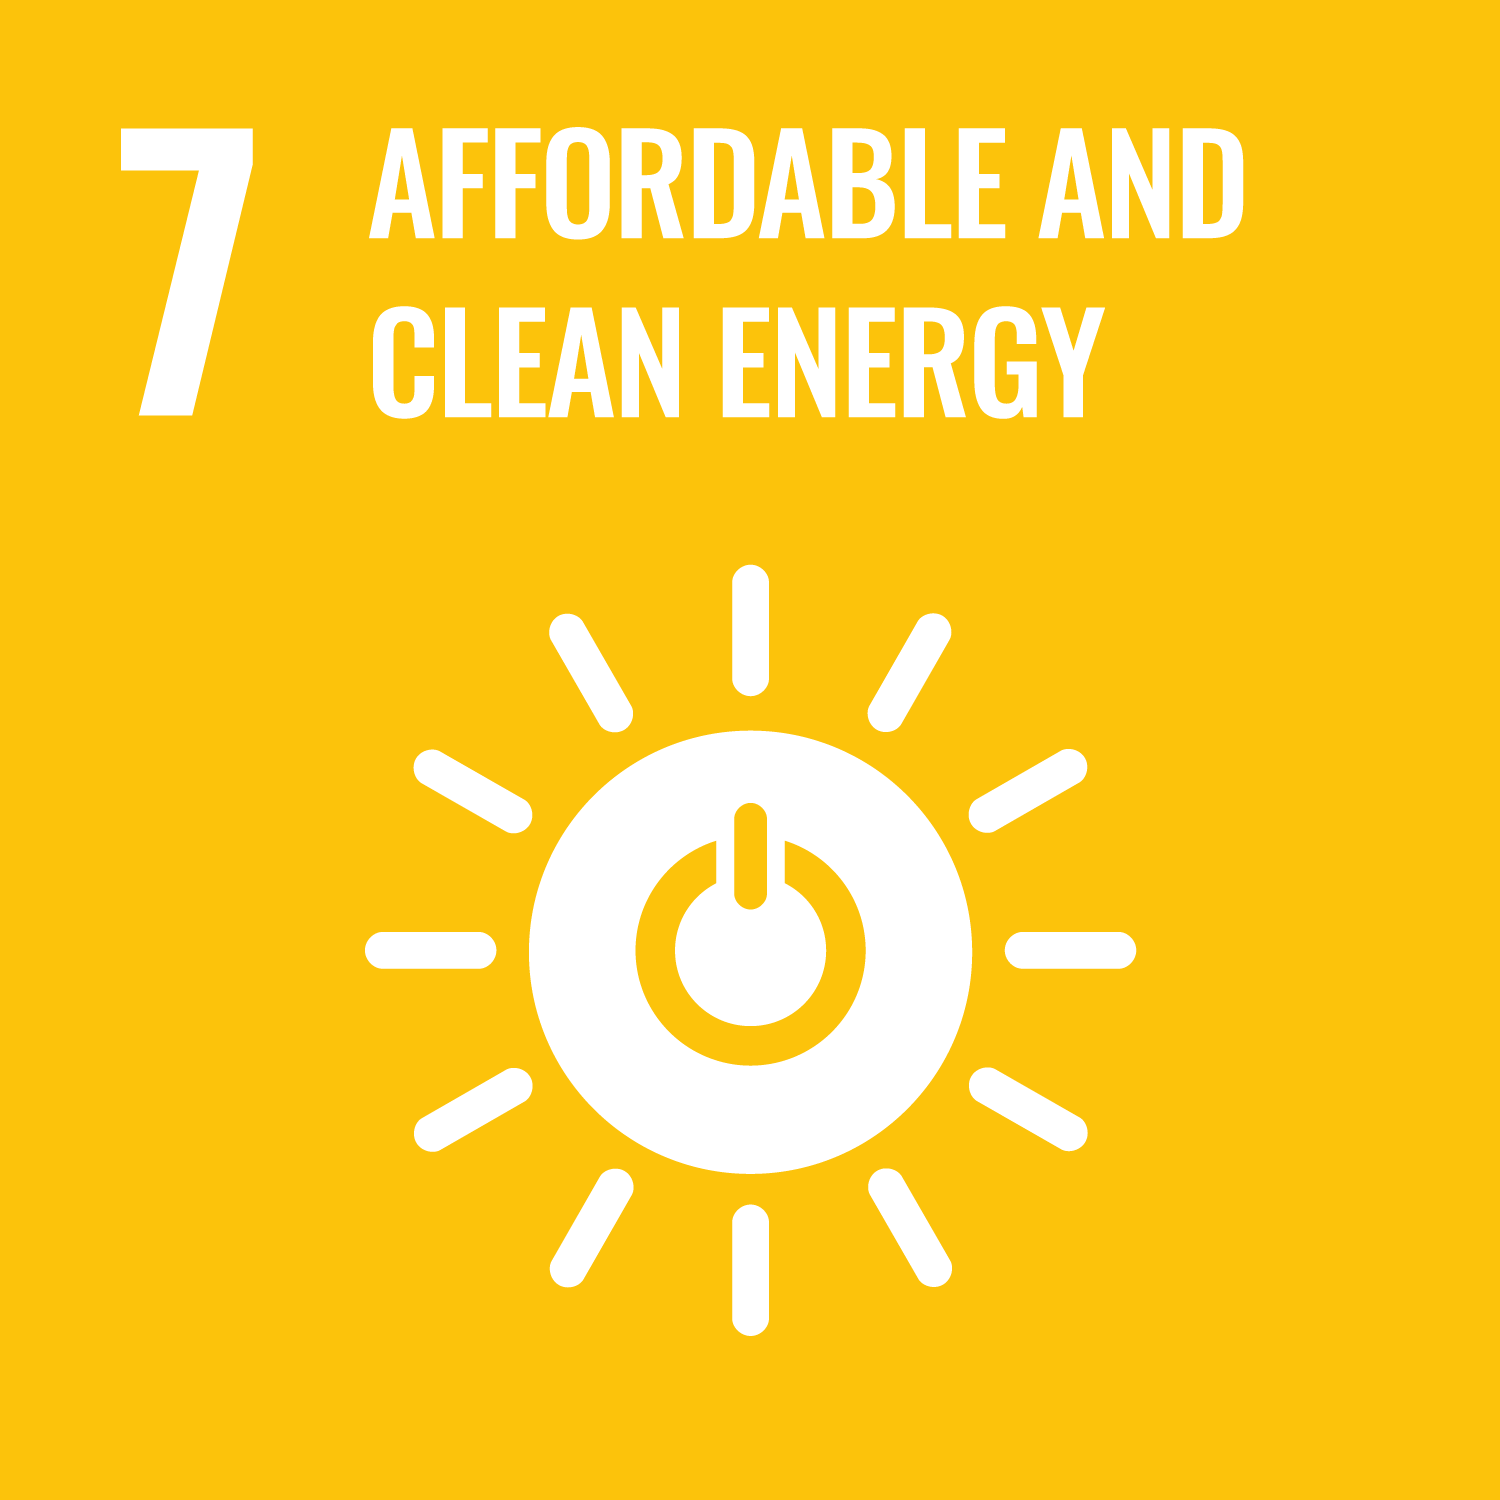 Affordable and clean energy - Goal 7